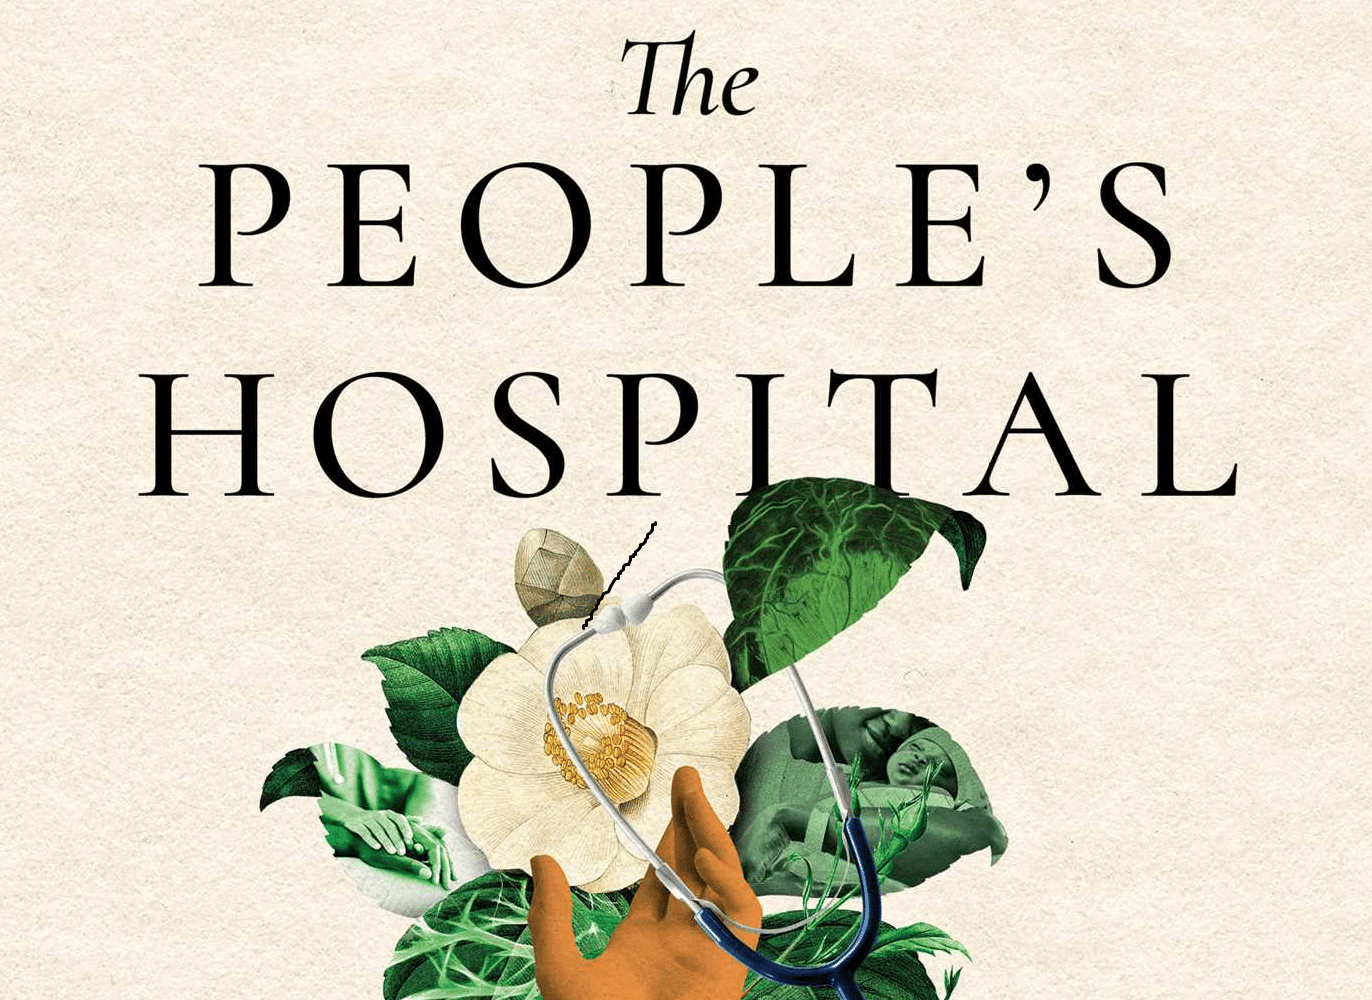 A graphic showing a Black hand, medical equipment, and flowers, along with the words "The People's Hospital"